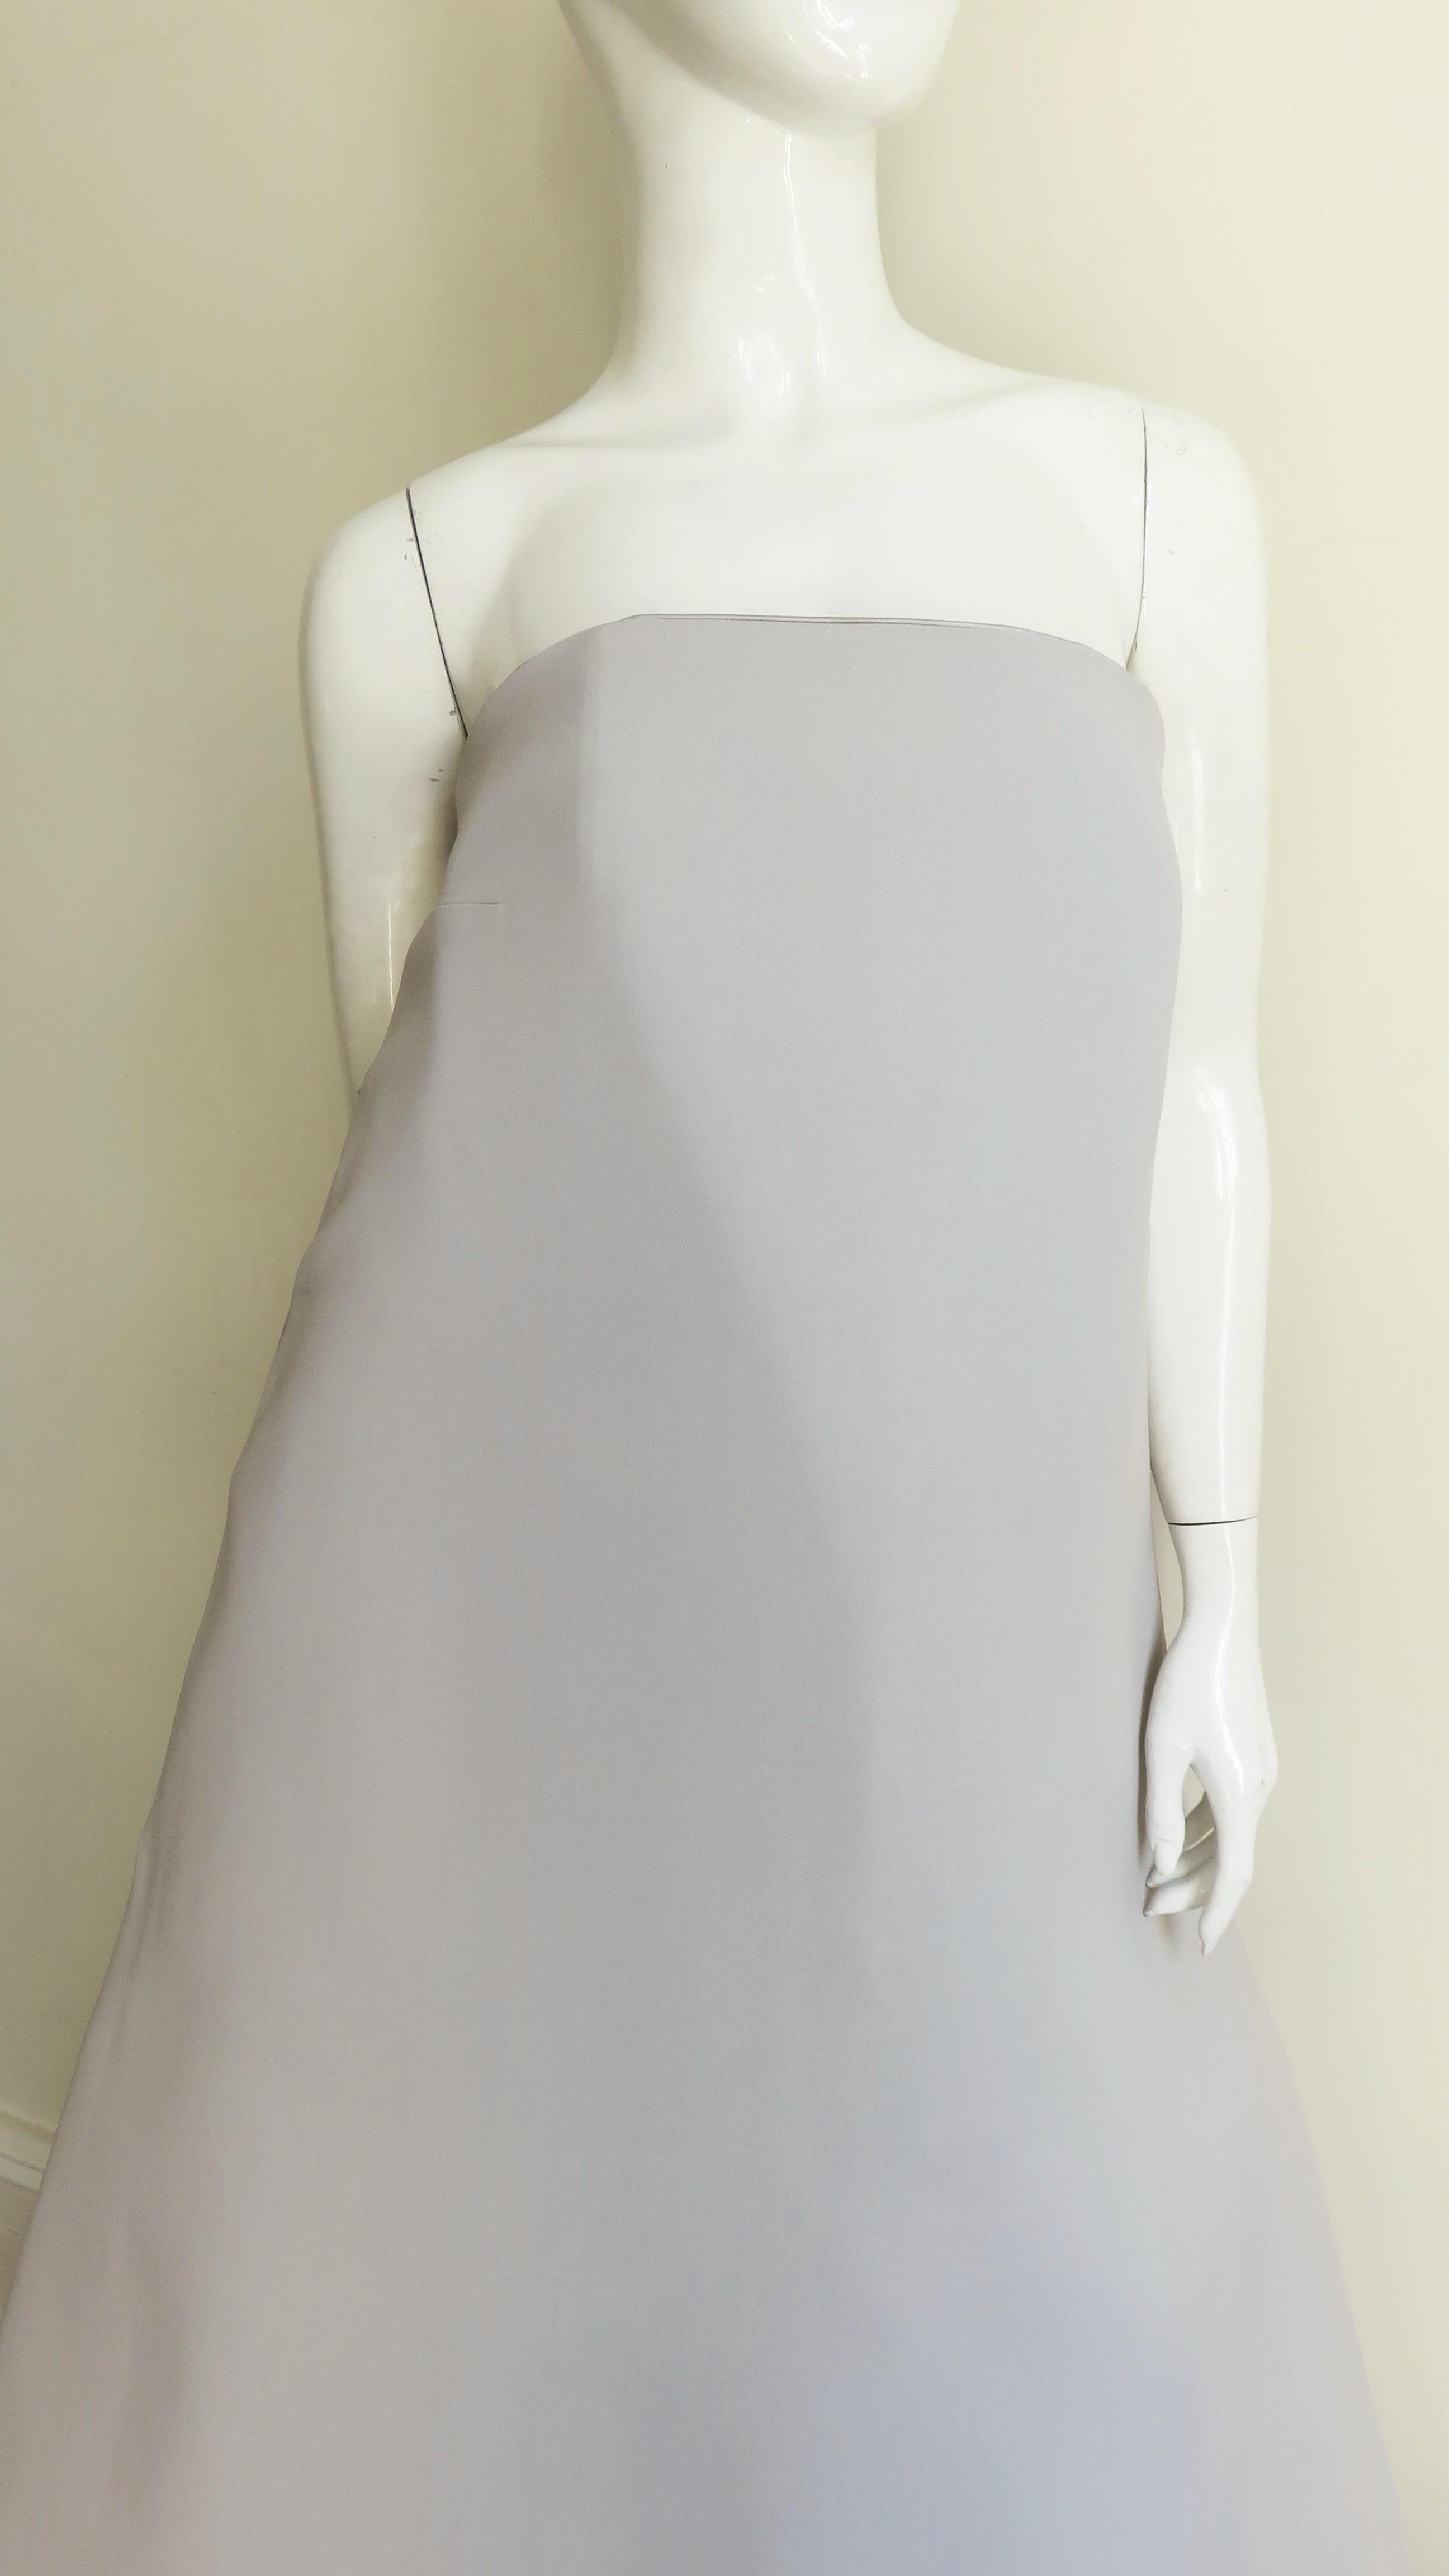 Martin Margiela New Strapless Color Block Dress In Excellent Condition For Sale In Water Mill, NY